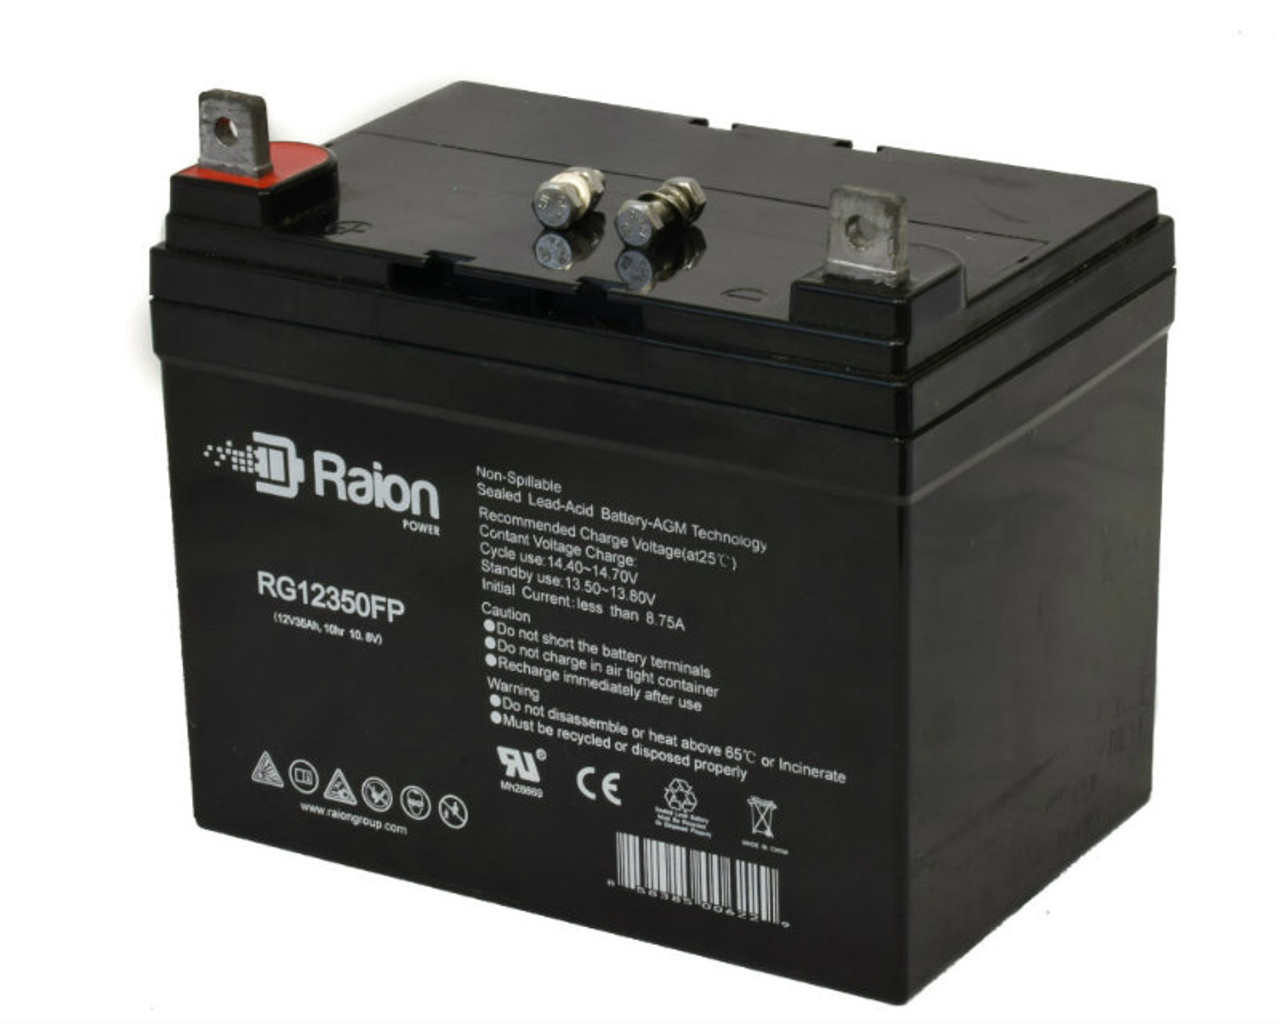 Raion Power Replacement 12V 35Ah Battery for J.I. Case & Case IH 210 - 1 Pack